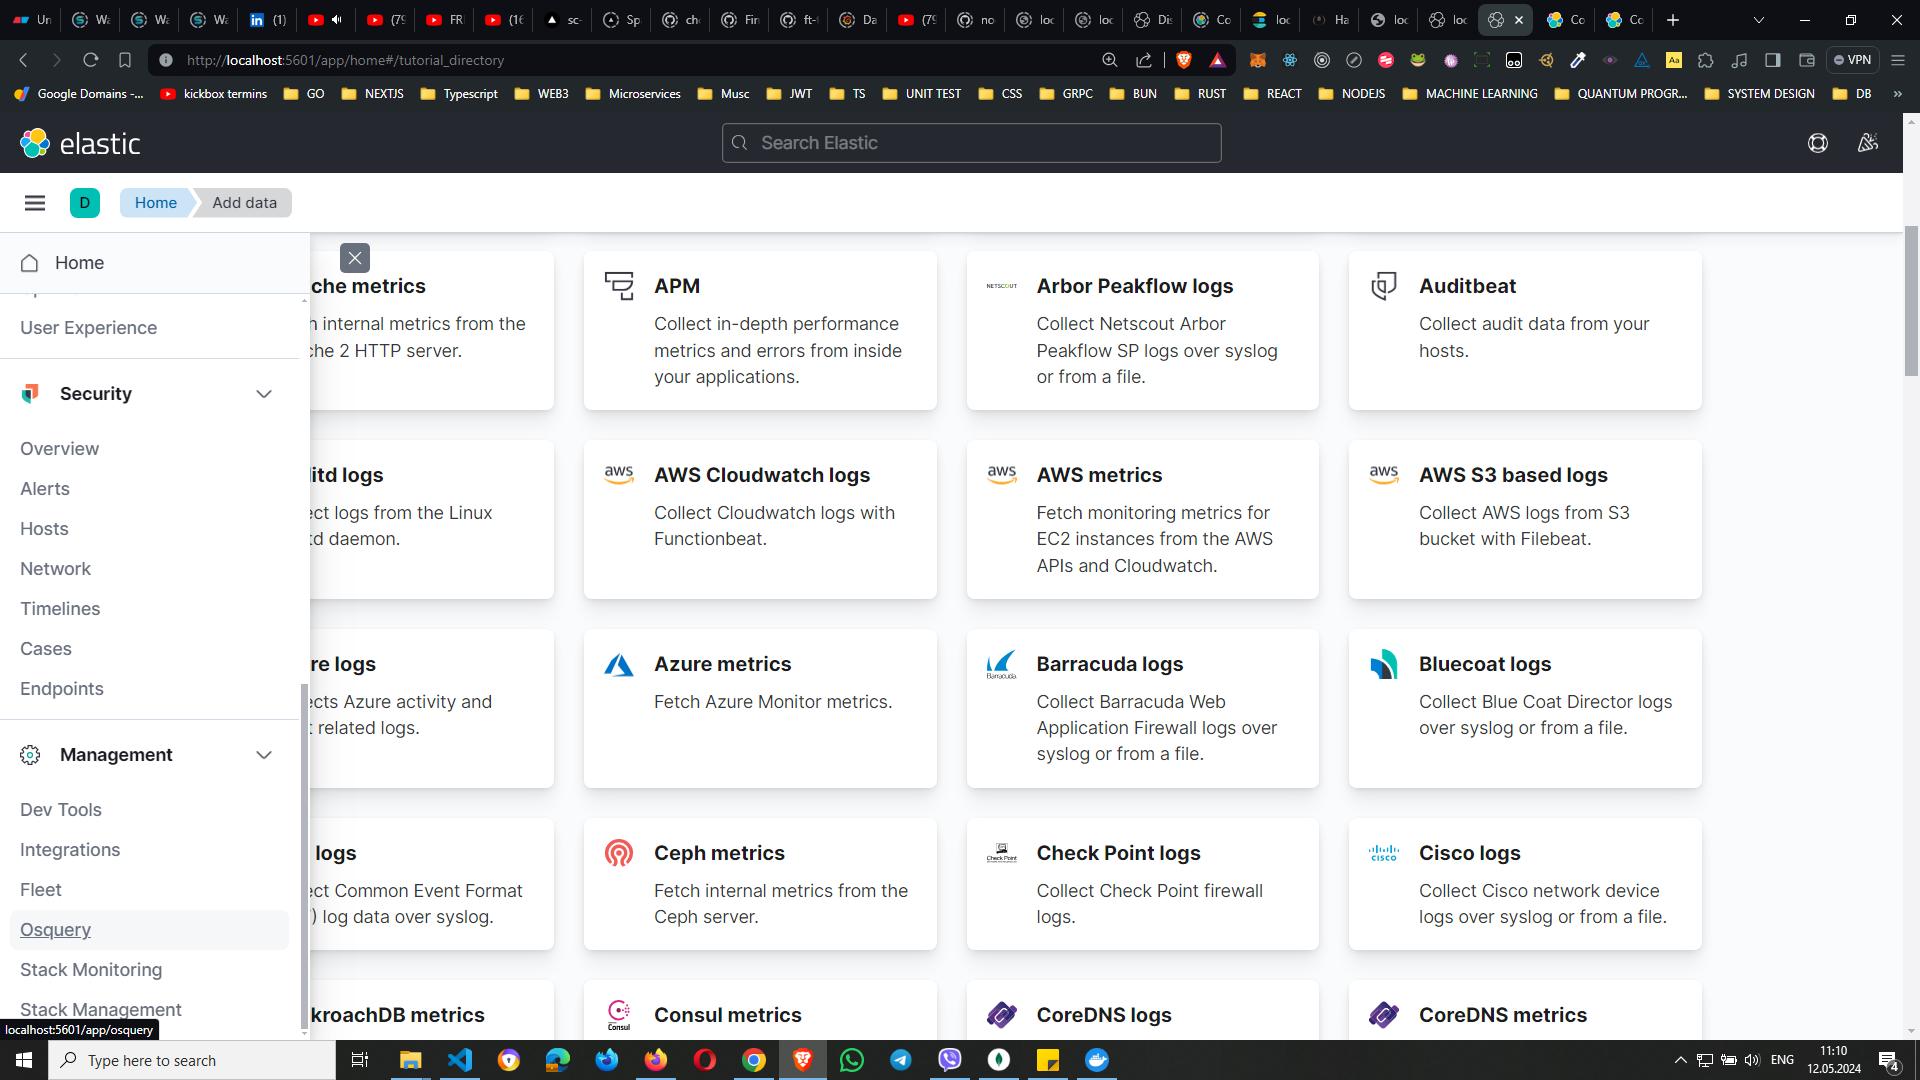 Screenshot of Elastic interface showing the `Add data` page with various integration options such as AWS Cloudwatch logs, AWS metrics, Azure metrics, Barracuda logs, and more, along with the sidebar menu open to Security and Management options